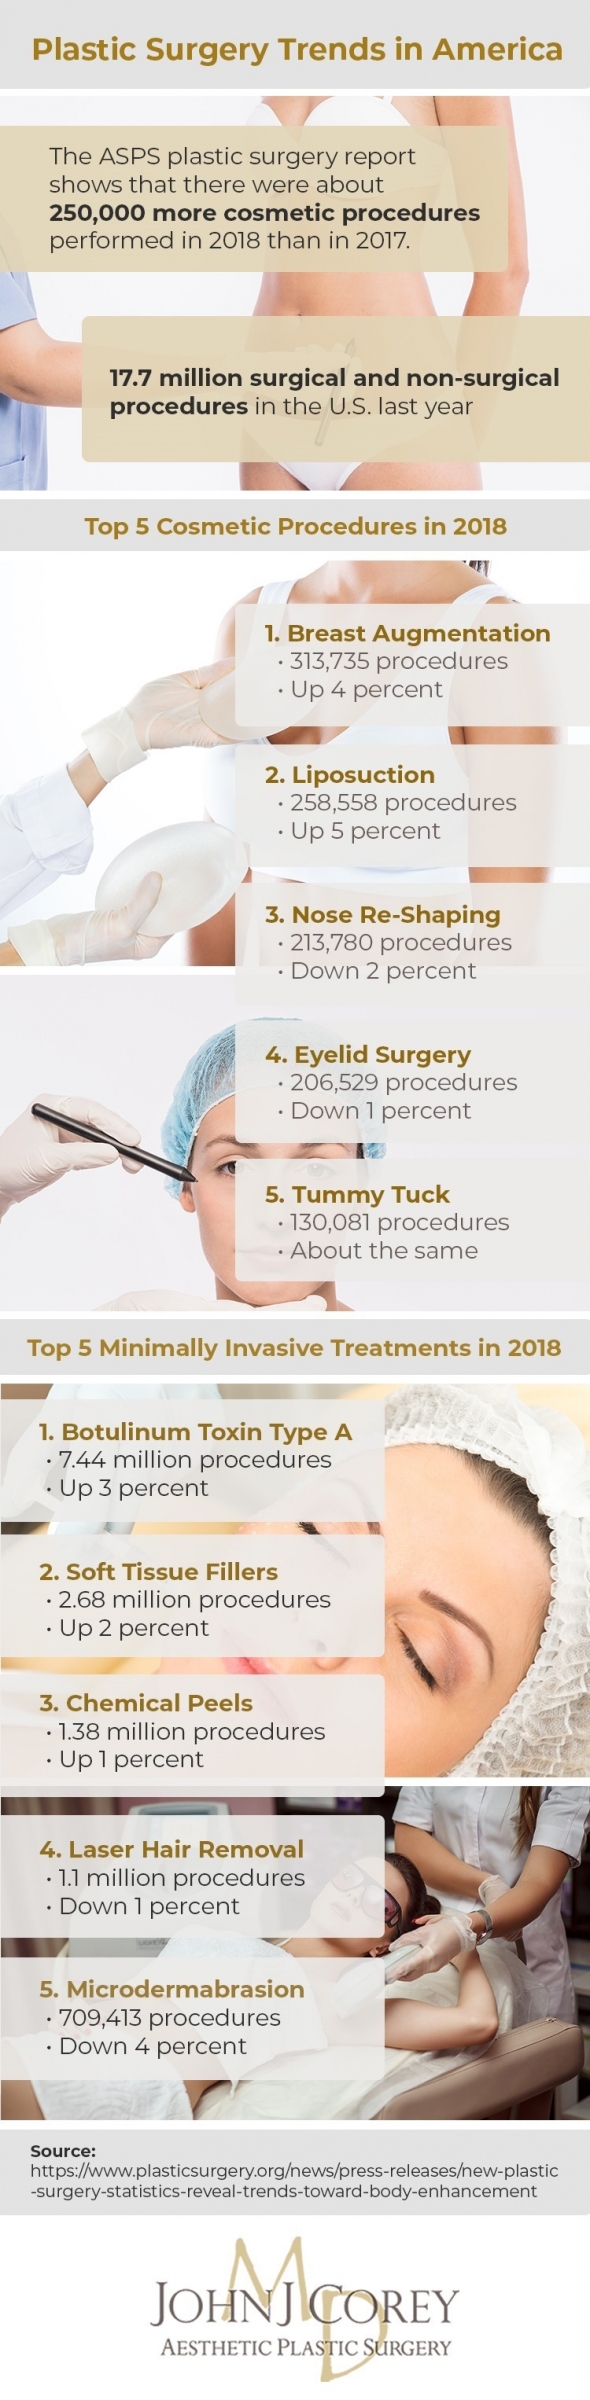 Infographic showing plastic surgery statistics in the U.S. in 2018